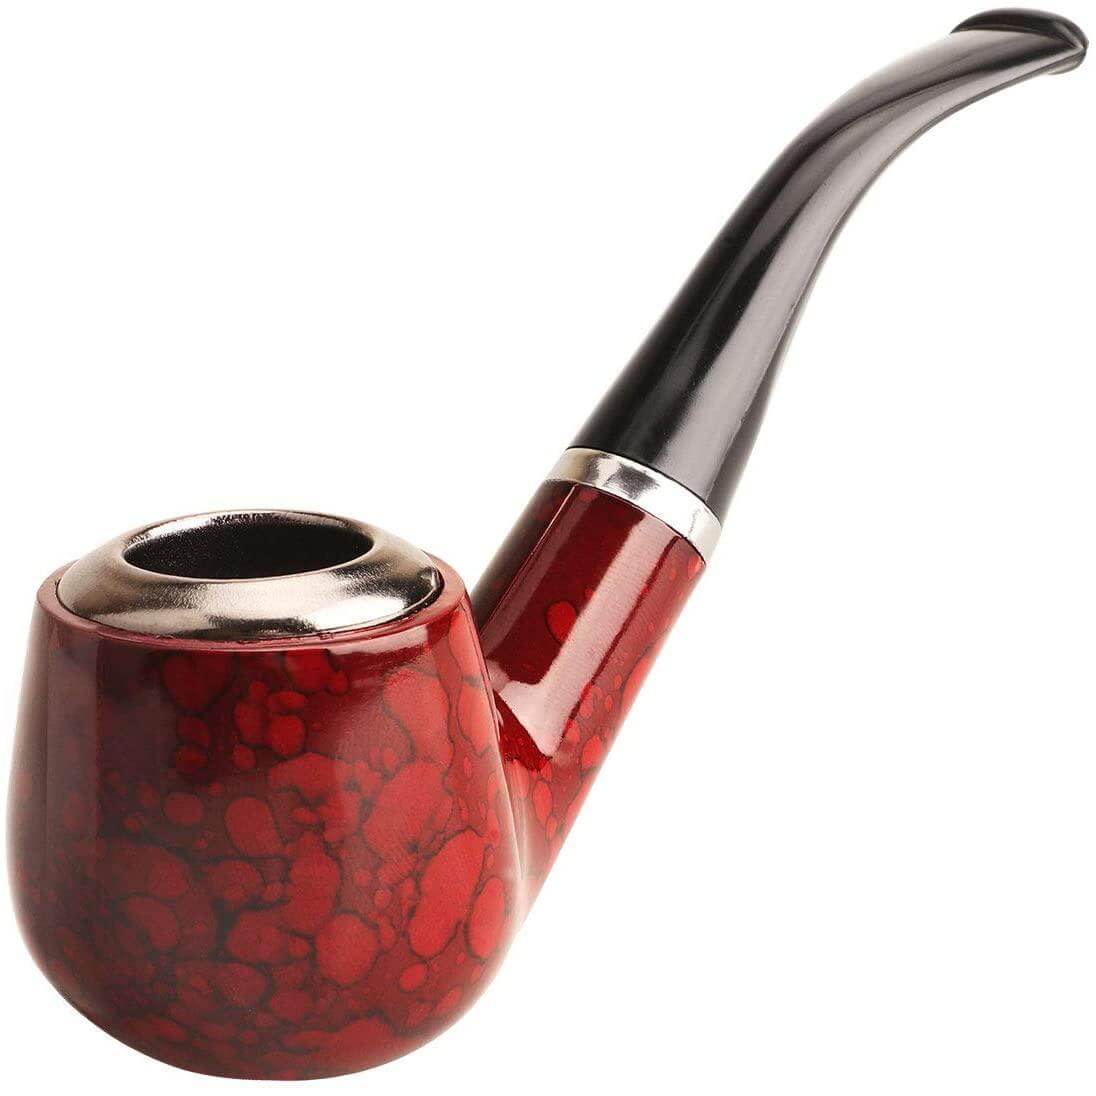 research on smoking pipes